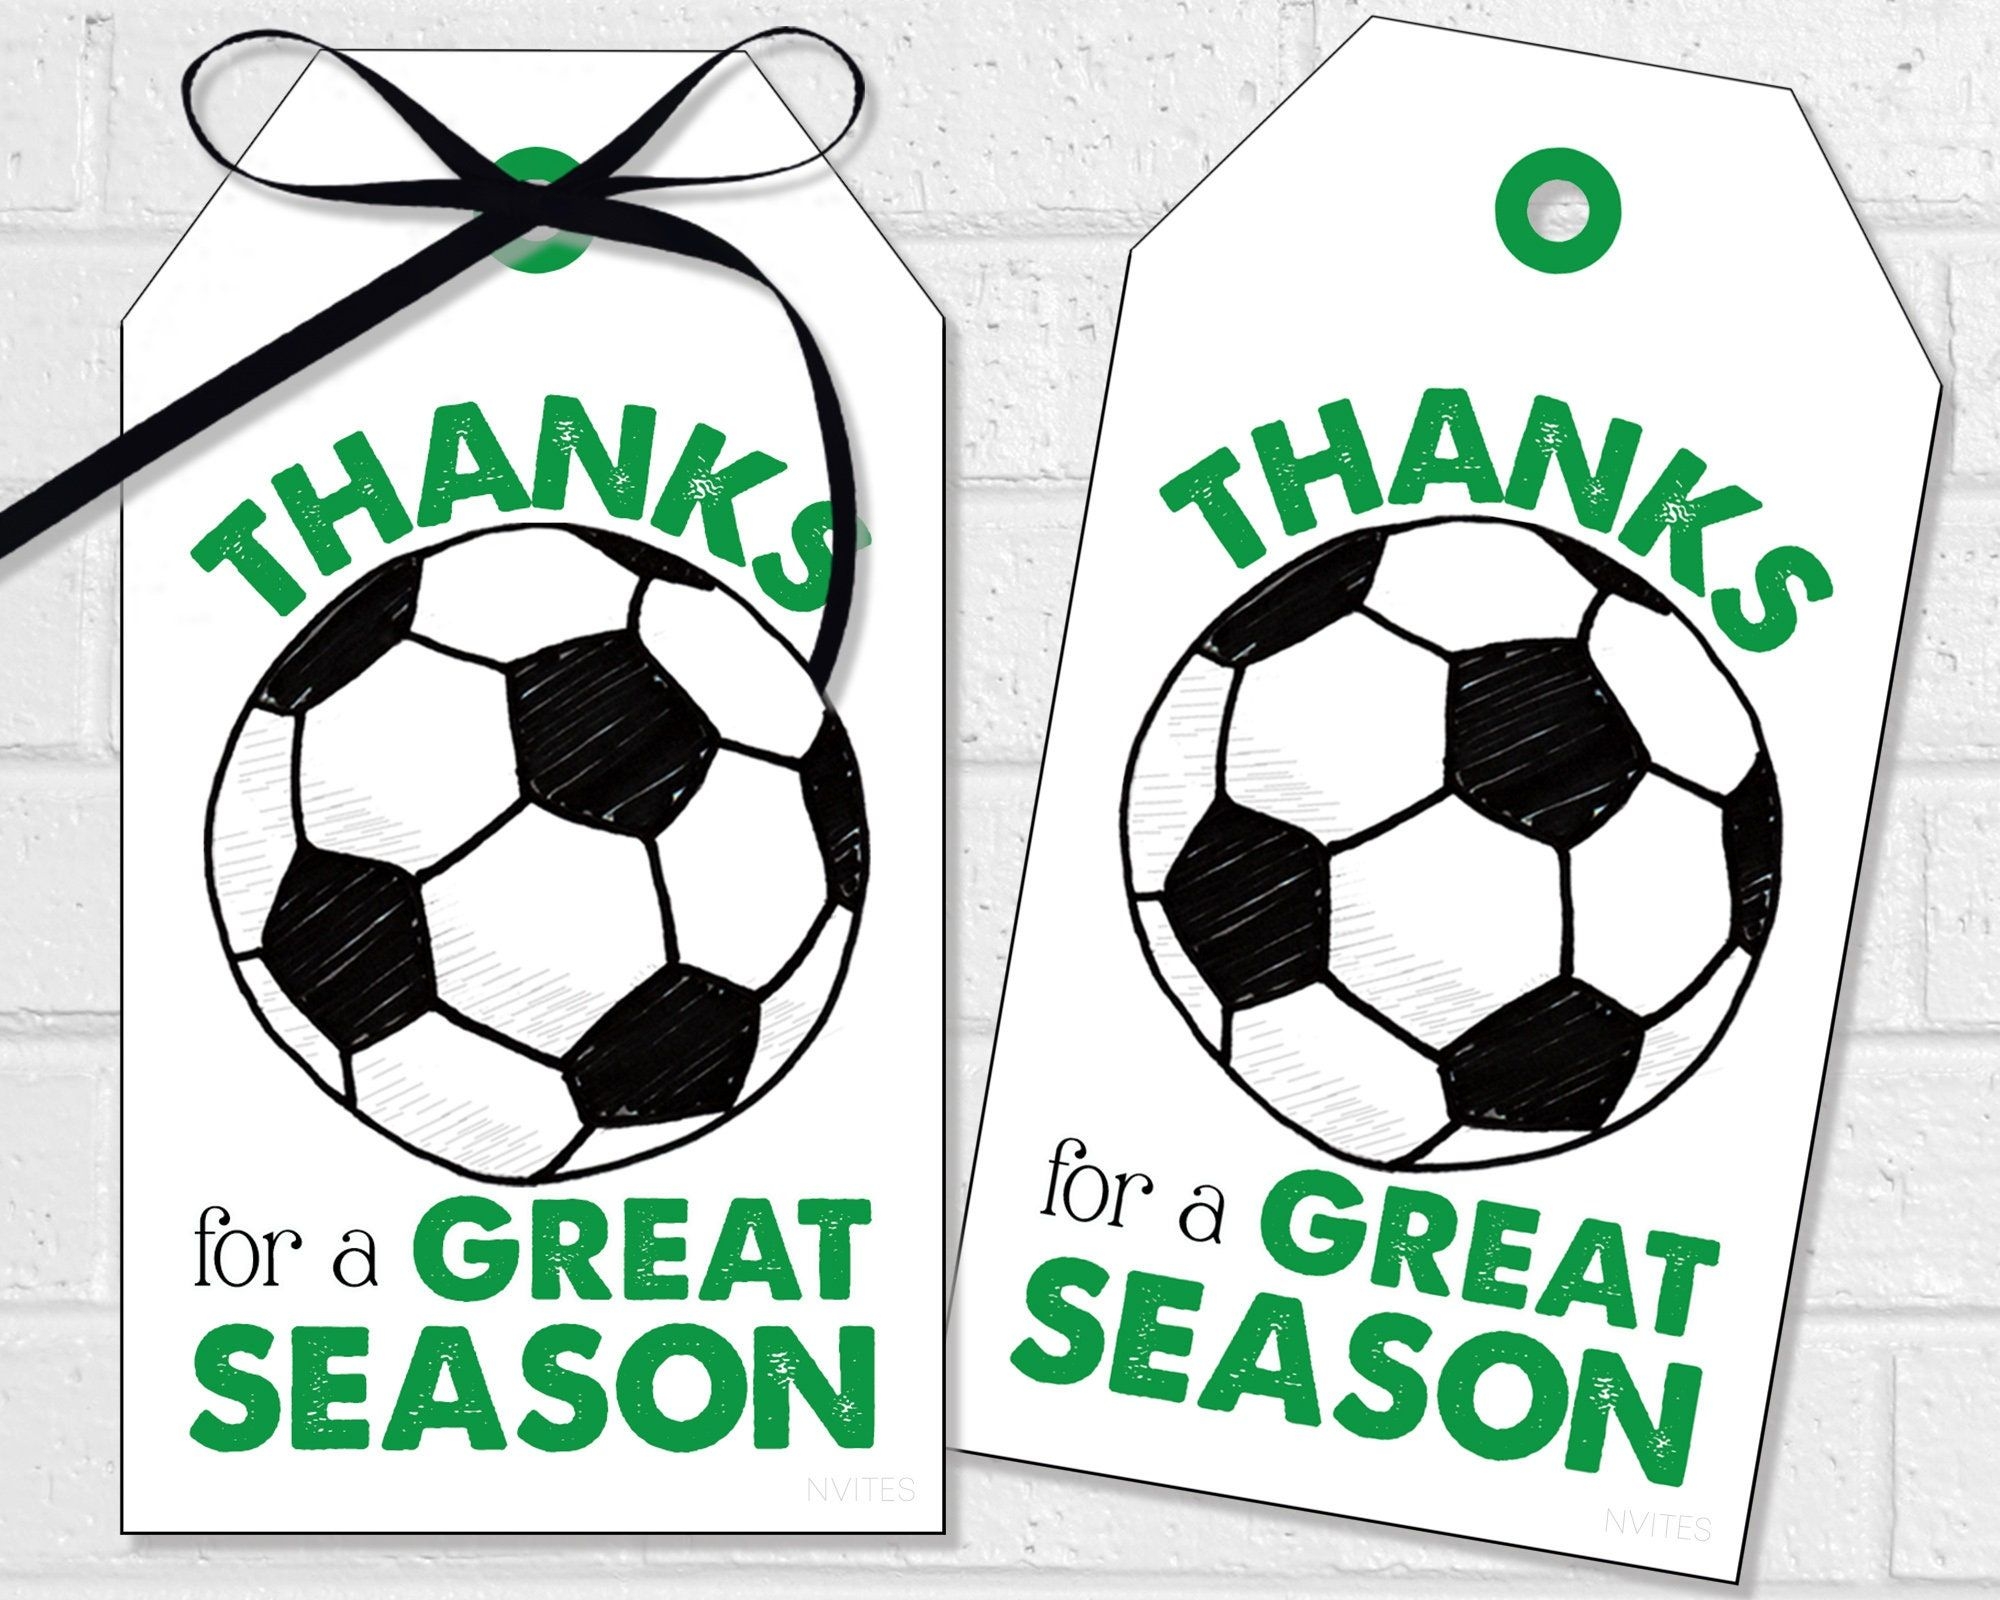 Soccer Great Season Tags Printable End Of Season Soccer Team Favor Gift Tags Or Stickers In Green Ball Team Thank You Treats Etsy Soccer Team Gifts Team Favors Soccer Gifts